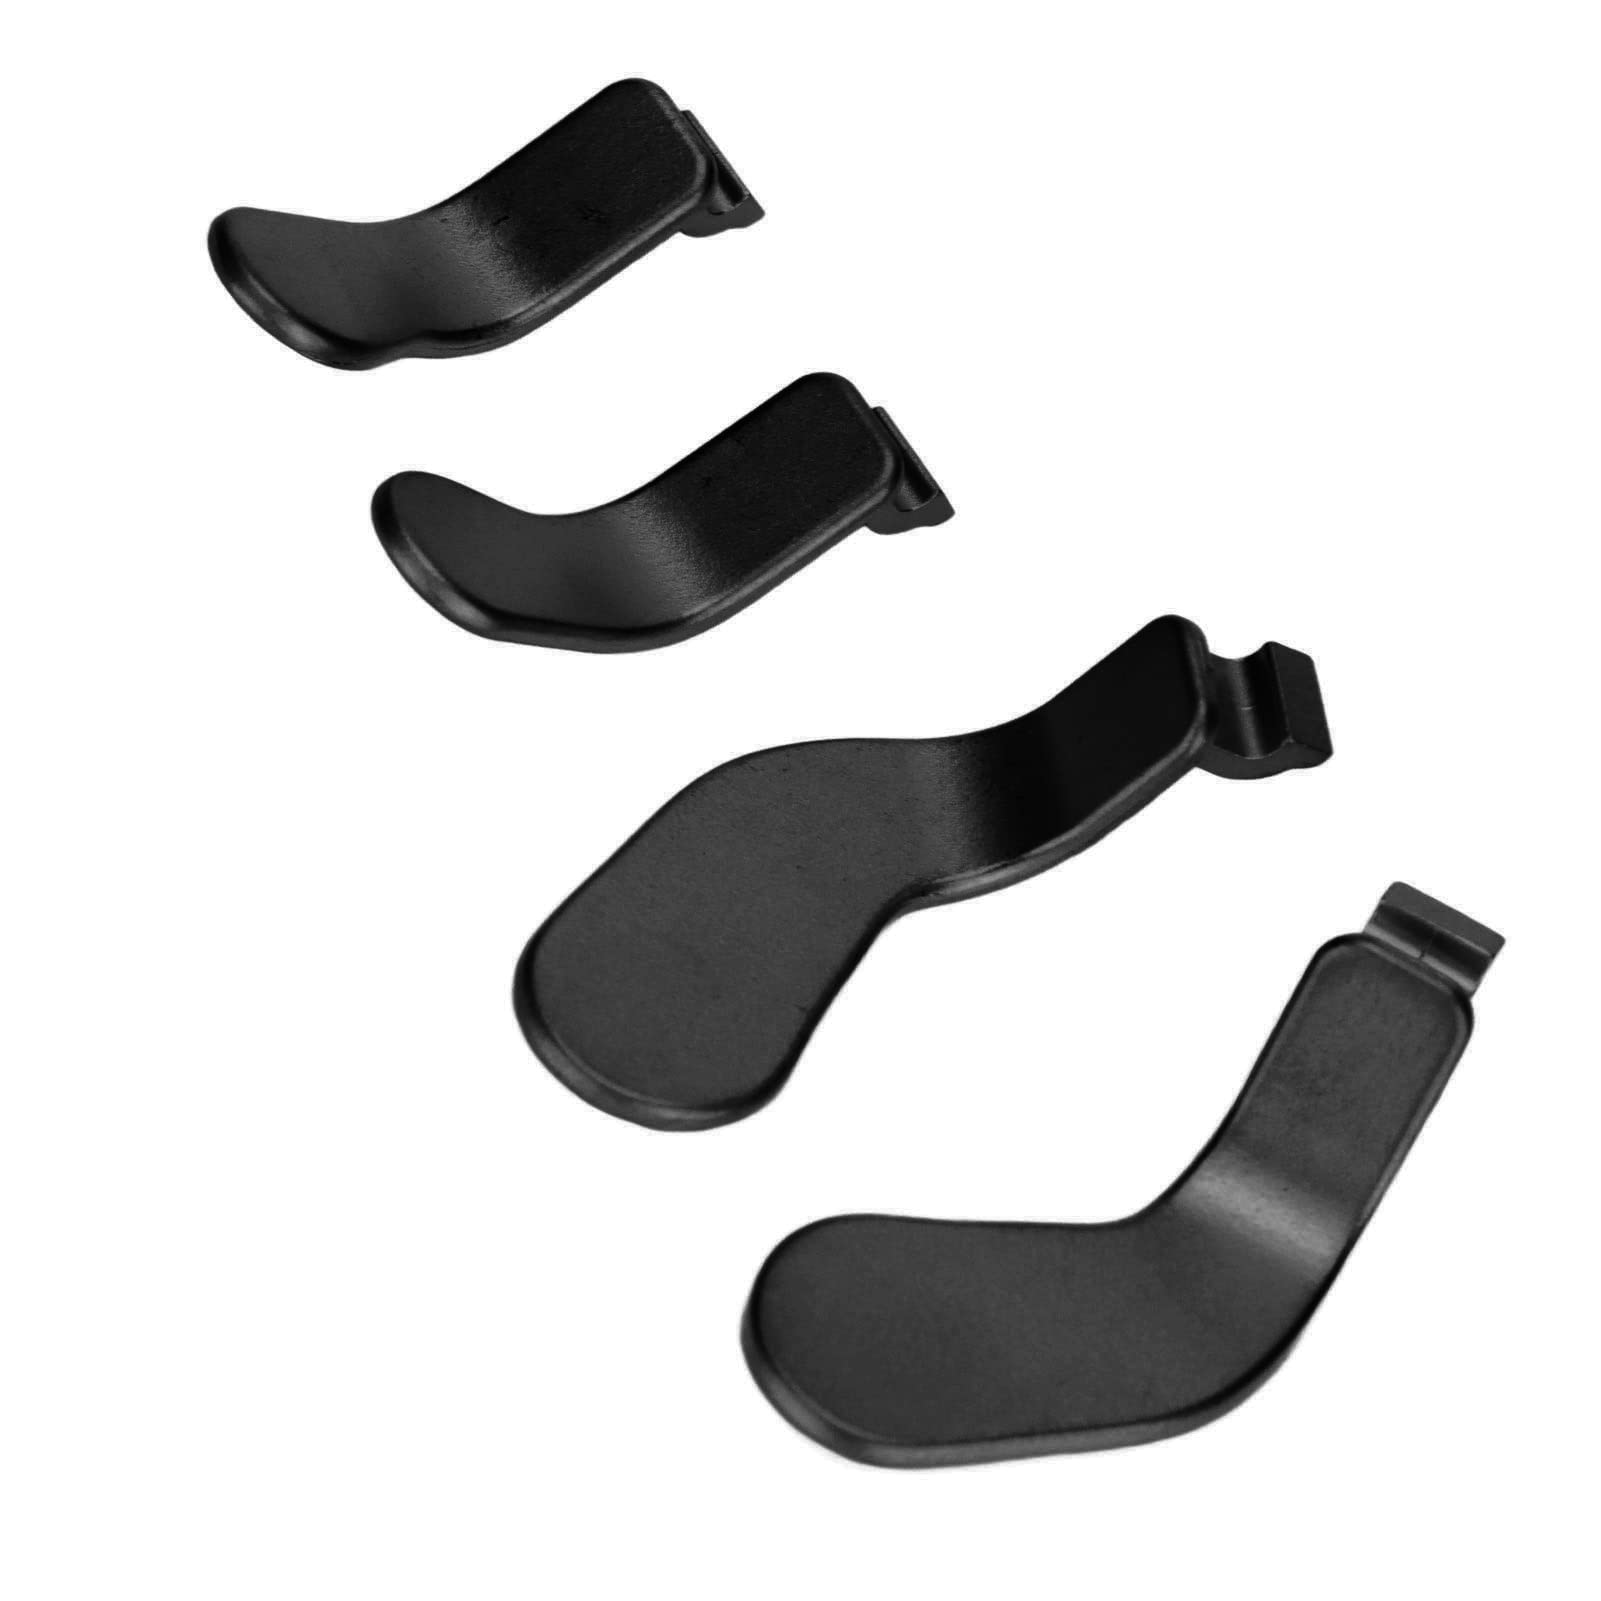 Estink Controller Paddles Kit, Pack of 4 Stainless Steel Trigger Paddles Replacement Controller Parts Video Games Accessories Fit for Xbox One Elite Controller Series 2 Model 1797 (Black) - amzGamess